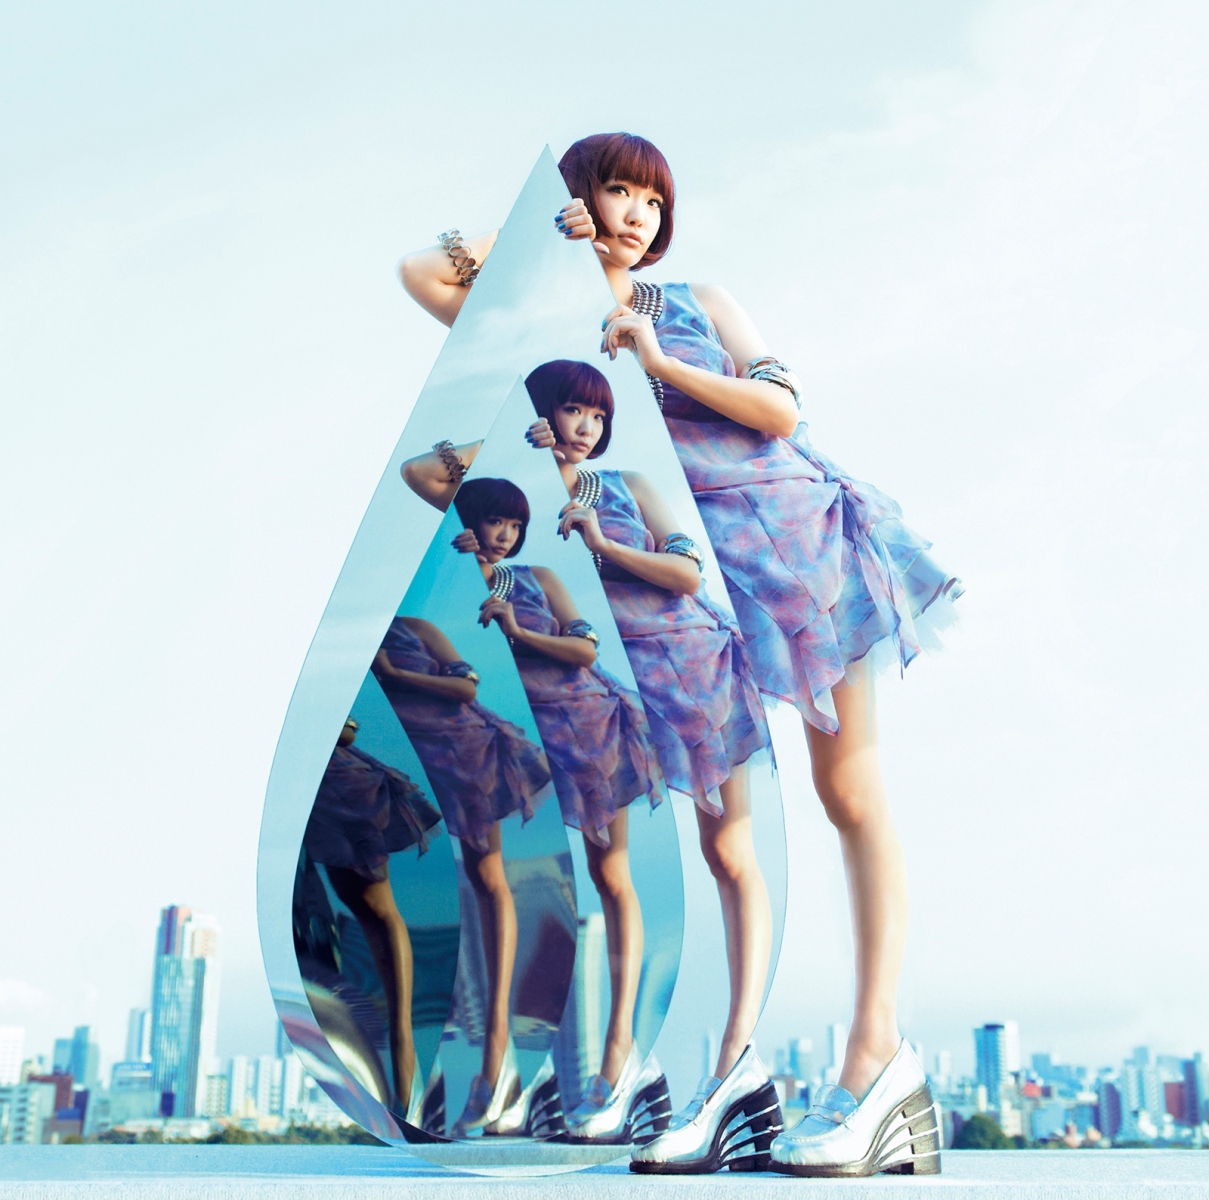 Yun*chi Reveals Audio Preview for her 2nd Single “Wonderful Wonder World*”